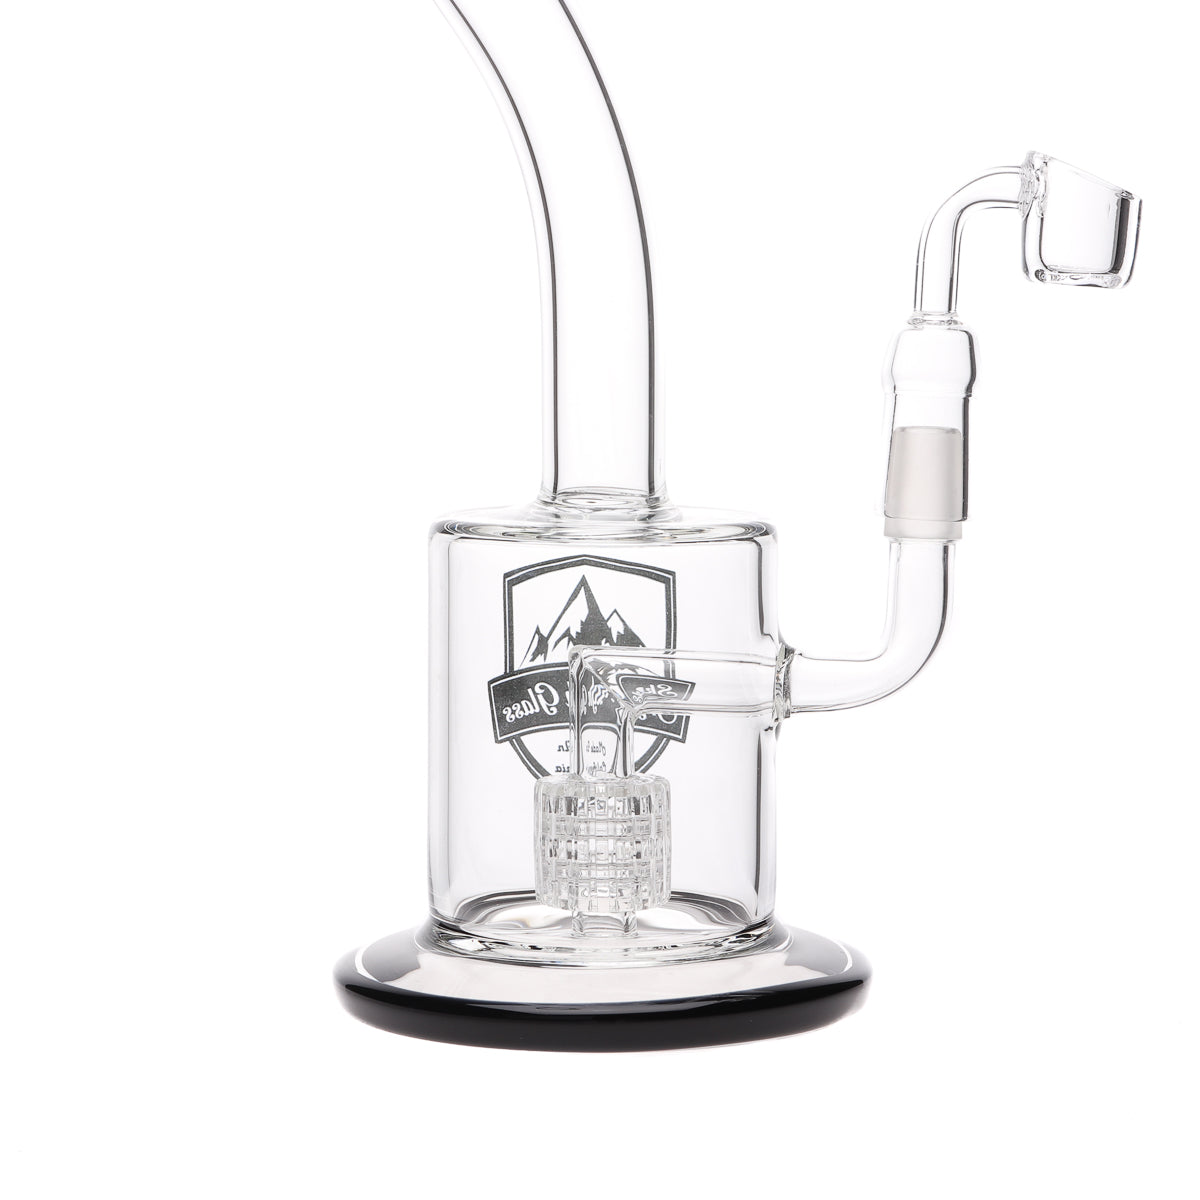 Sky High Glass LowPro Dab Rig